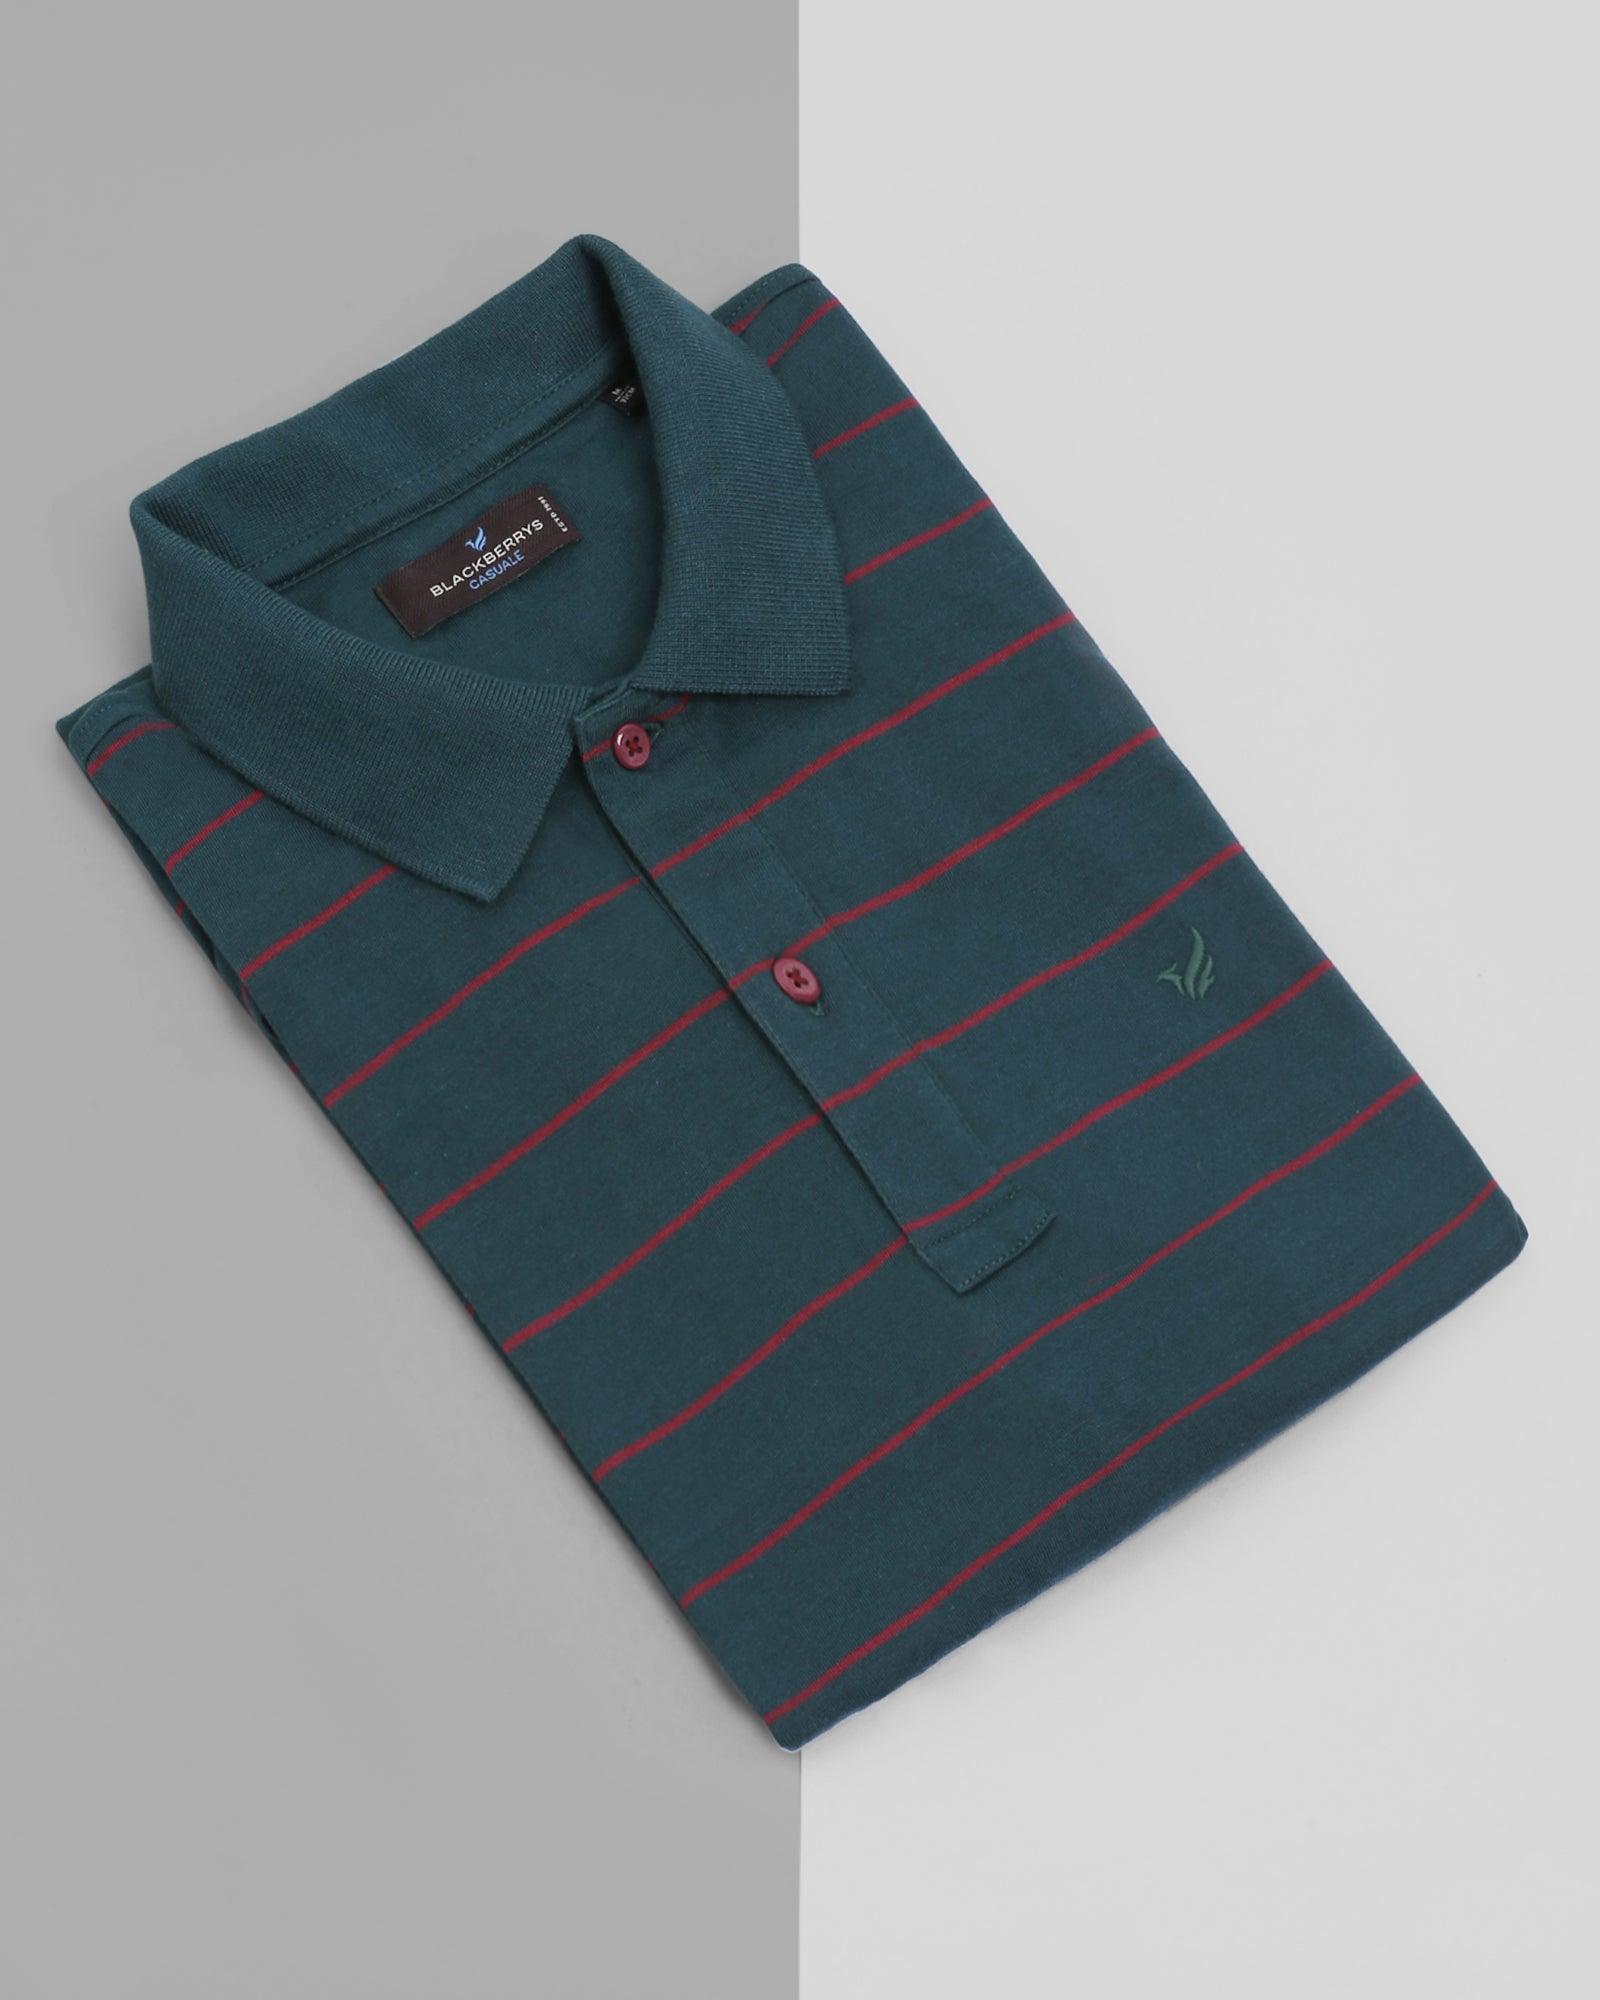 Polo Teal Green Striped T Shirt - Charles